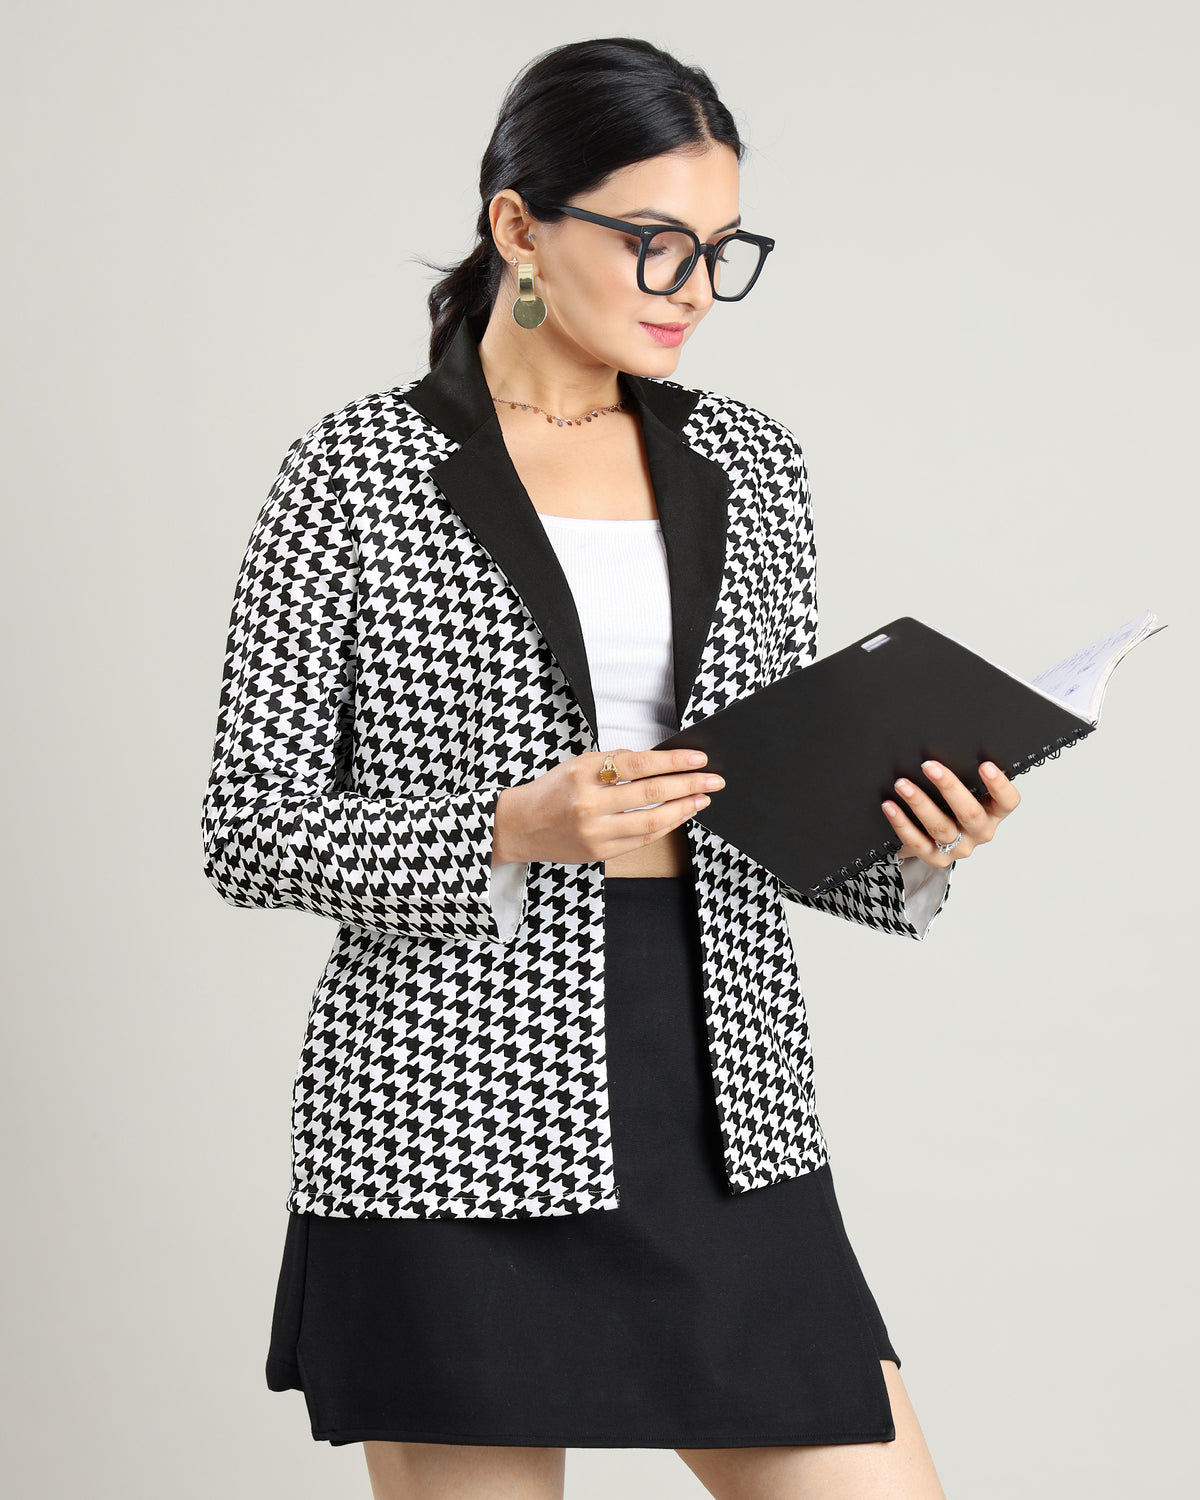 The One And Only: Black & White Patterned Jacket